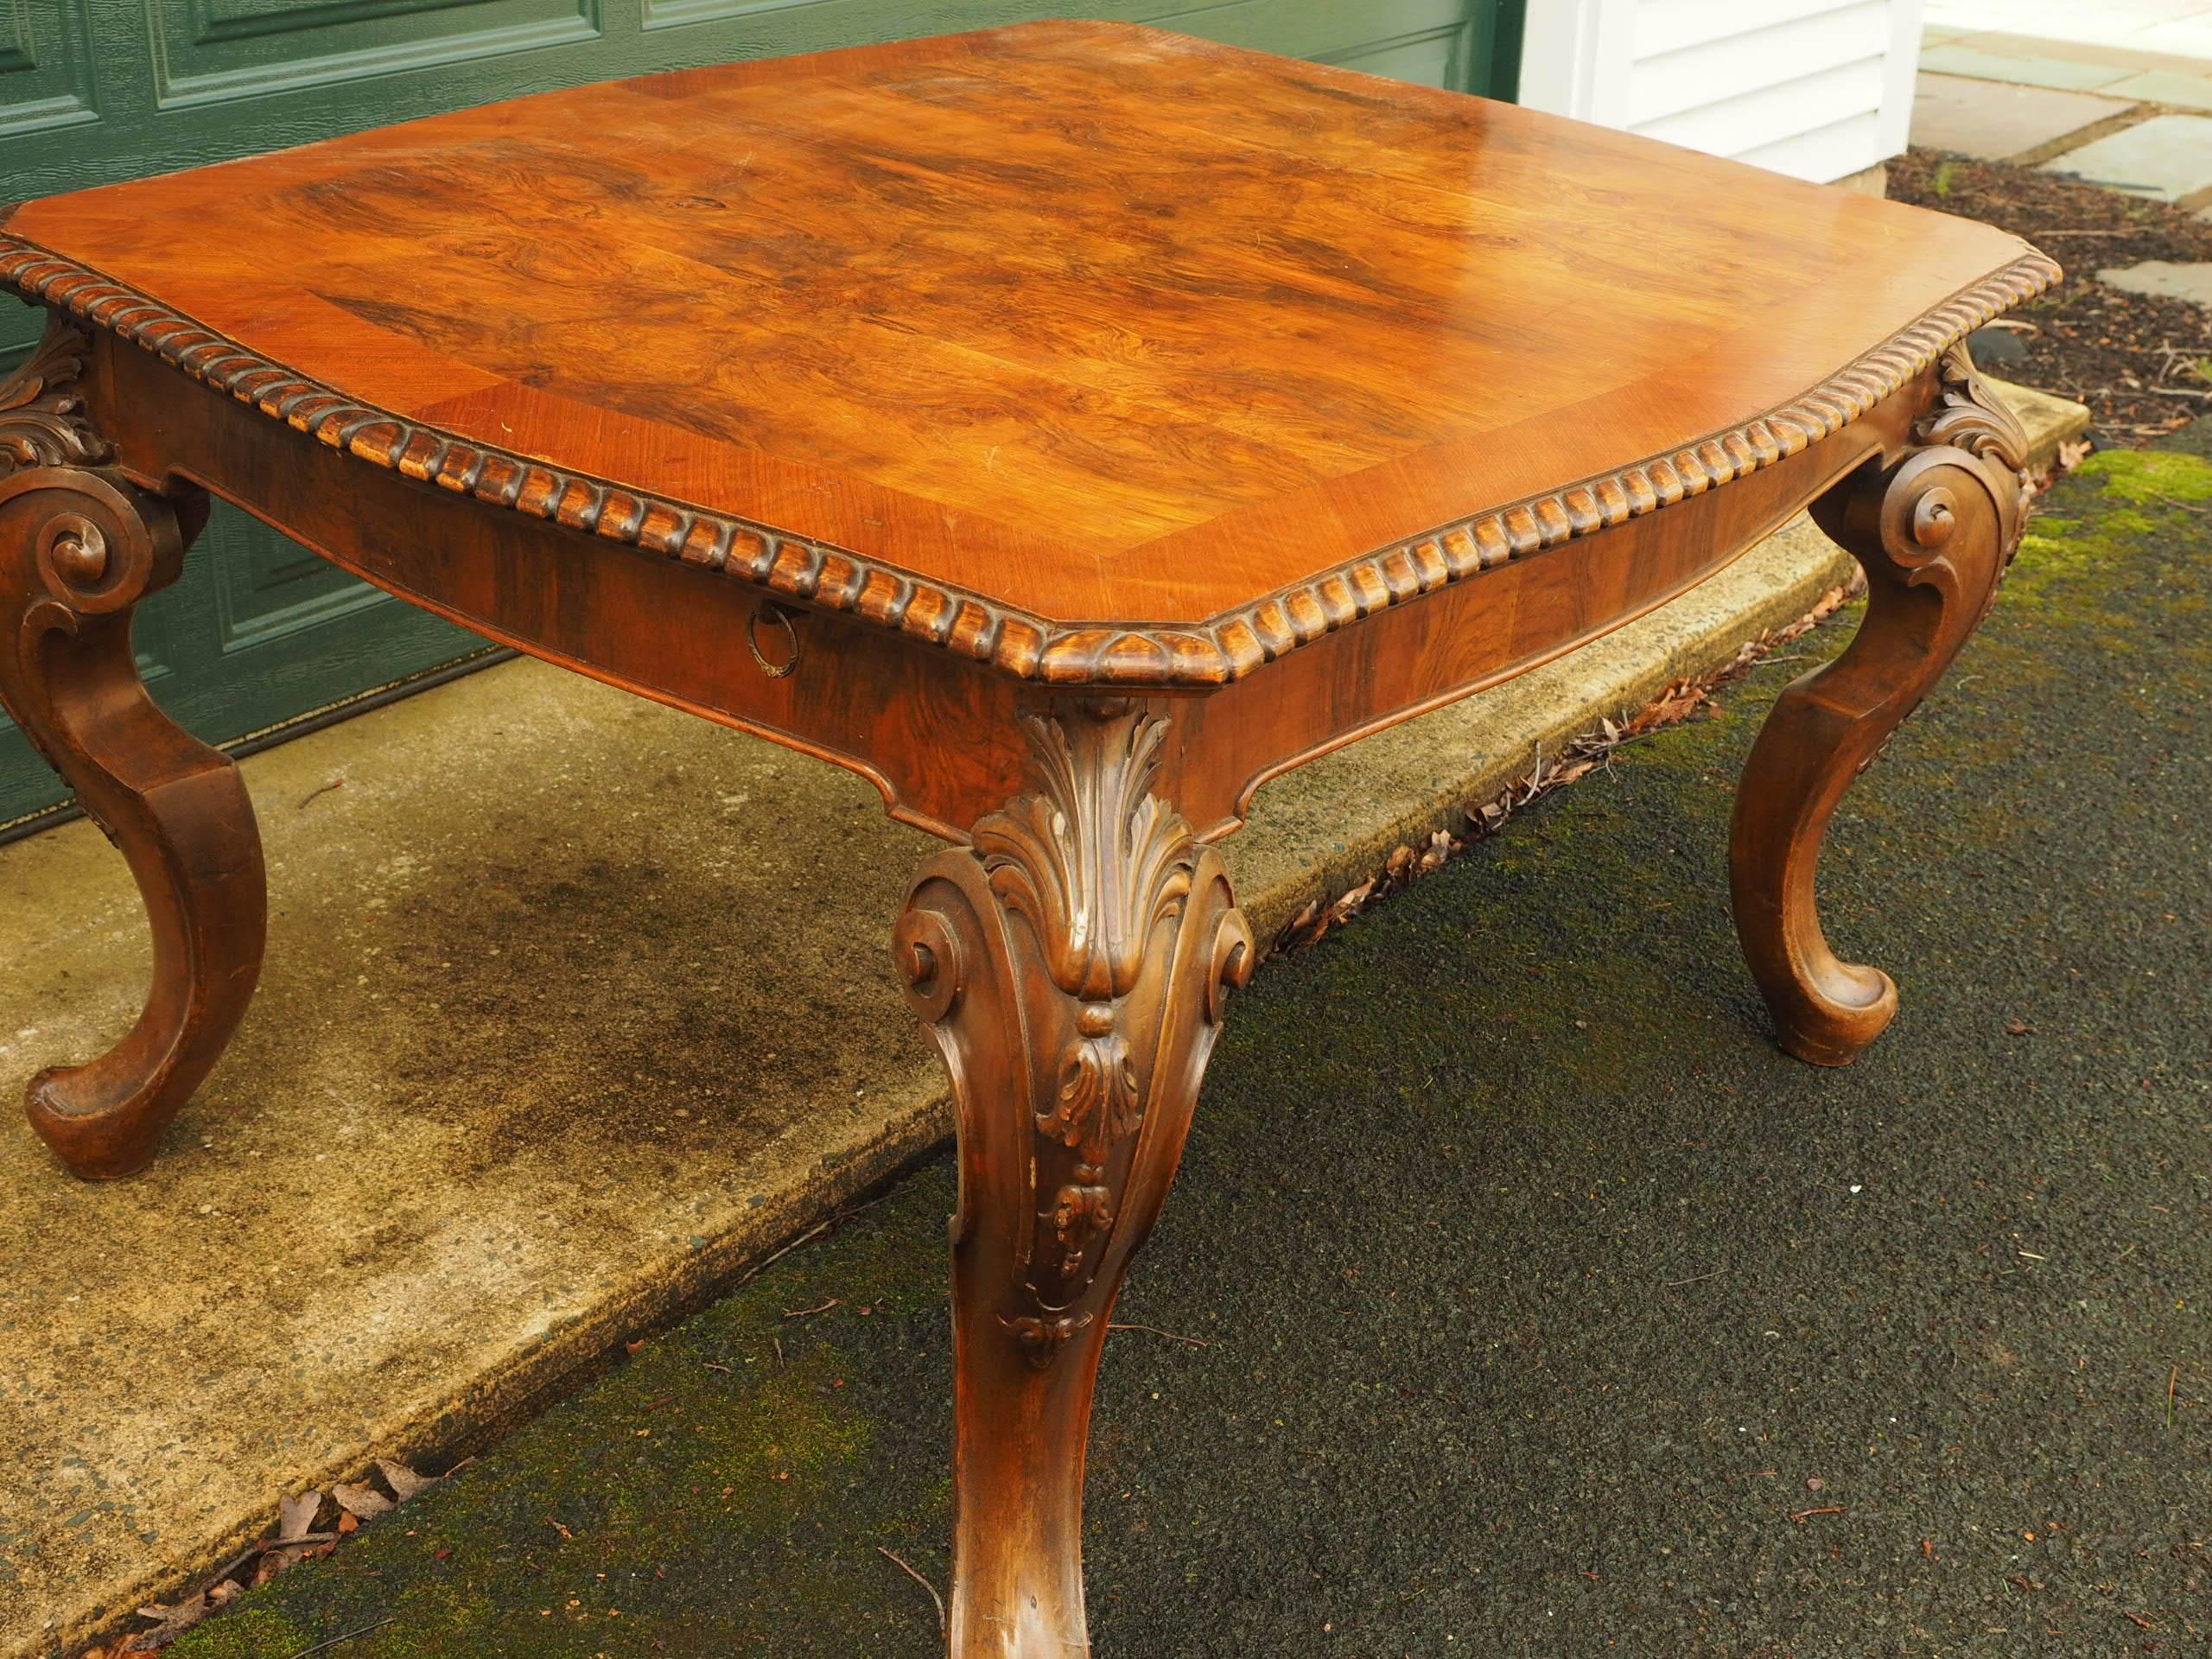 With a shaped top of figured walnut with mahogany crossbanding, carved gadrooned border, and canted corners. A figured walnut apron with one ring preserved, the whole raised on heavily carved cabriole legs with scrolled acanthus leaf knees.